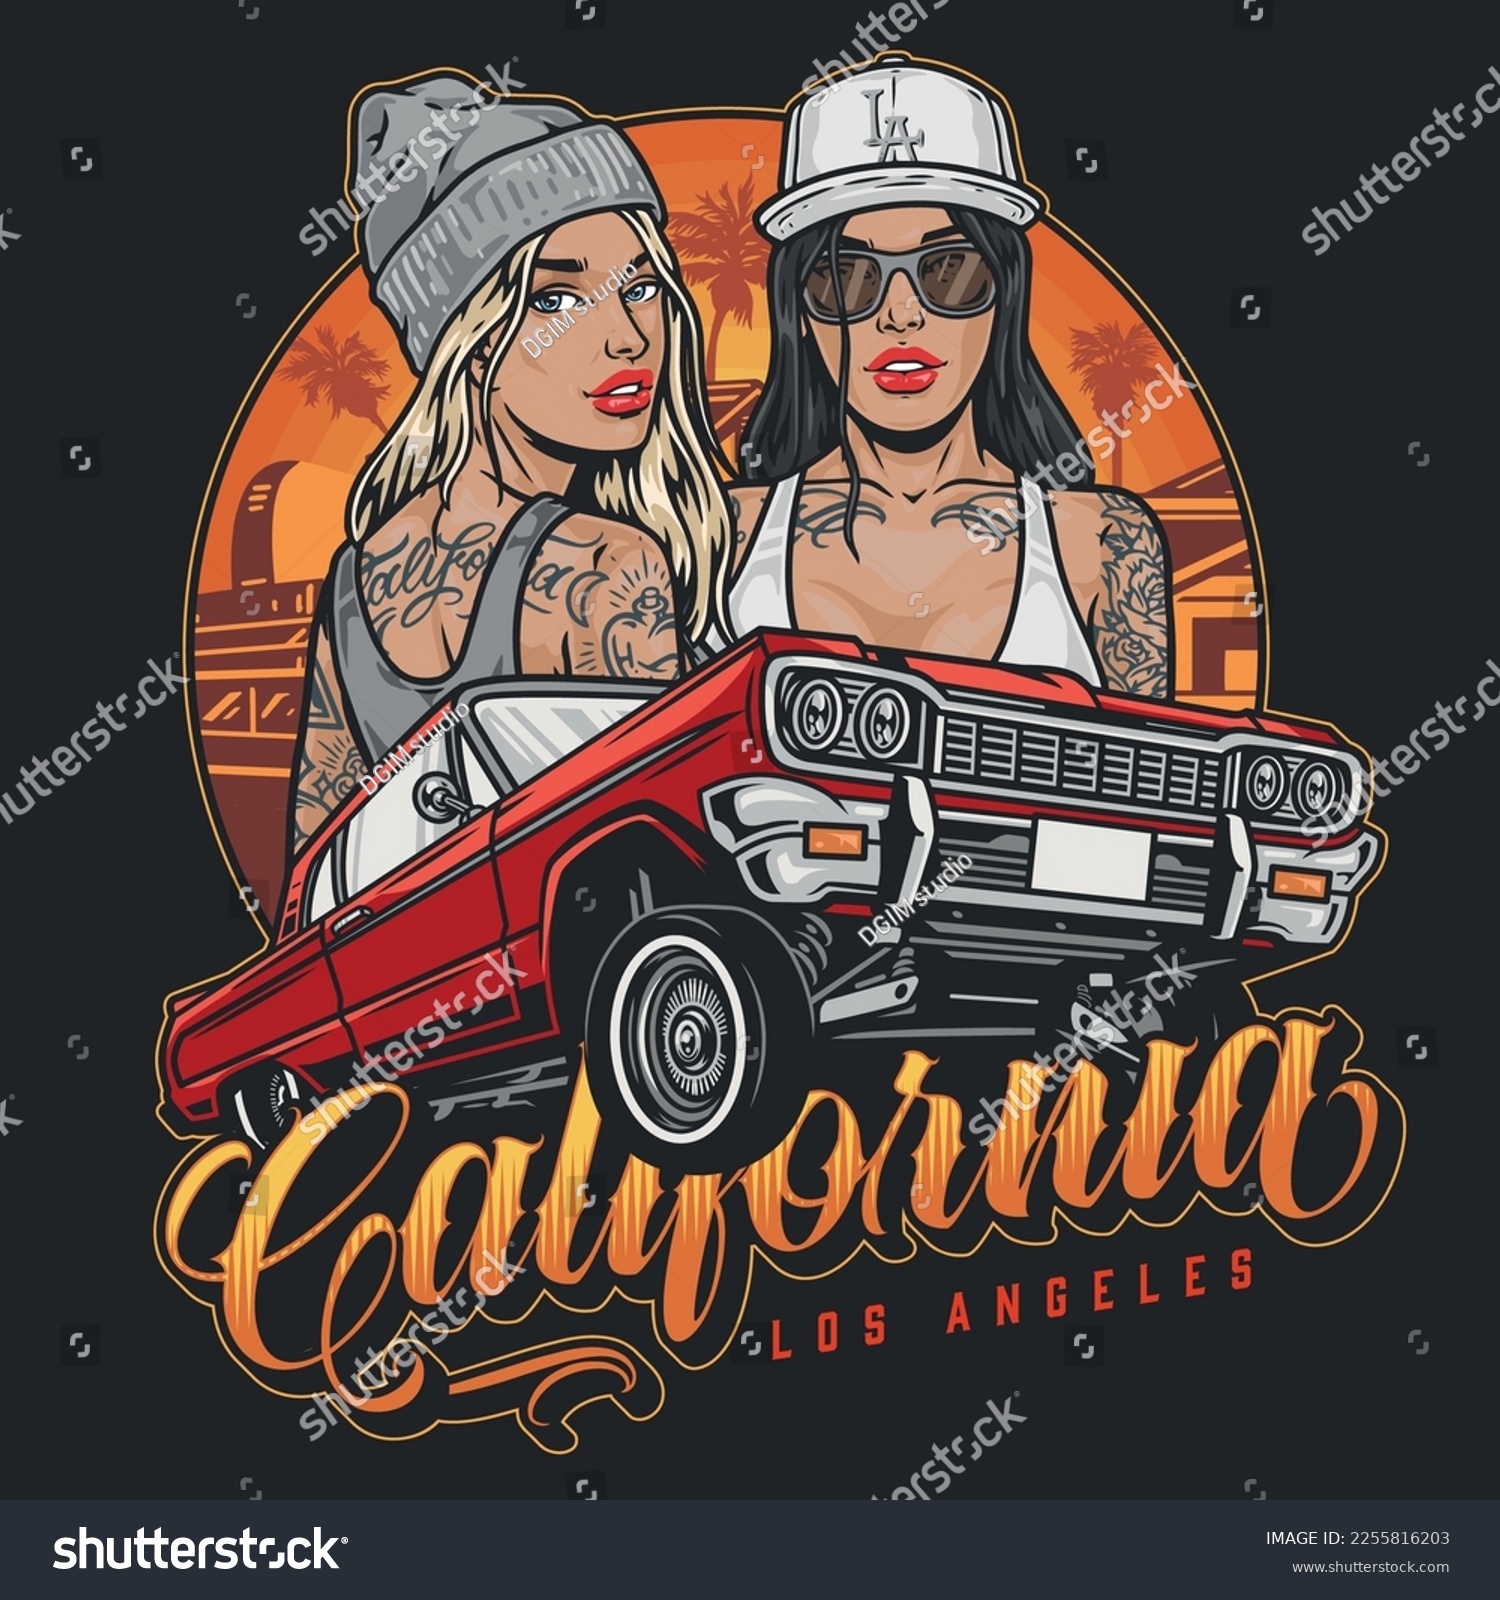 SVG of Beautiful lowrider girls flyer colorful car for street racing in Los Angeles and tattooed hot belle vector illustration svg